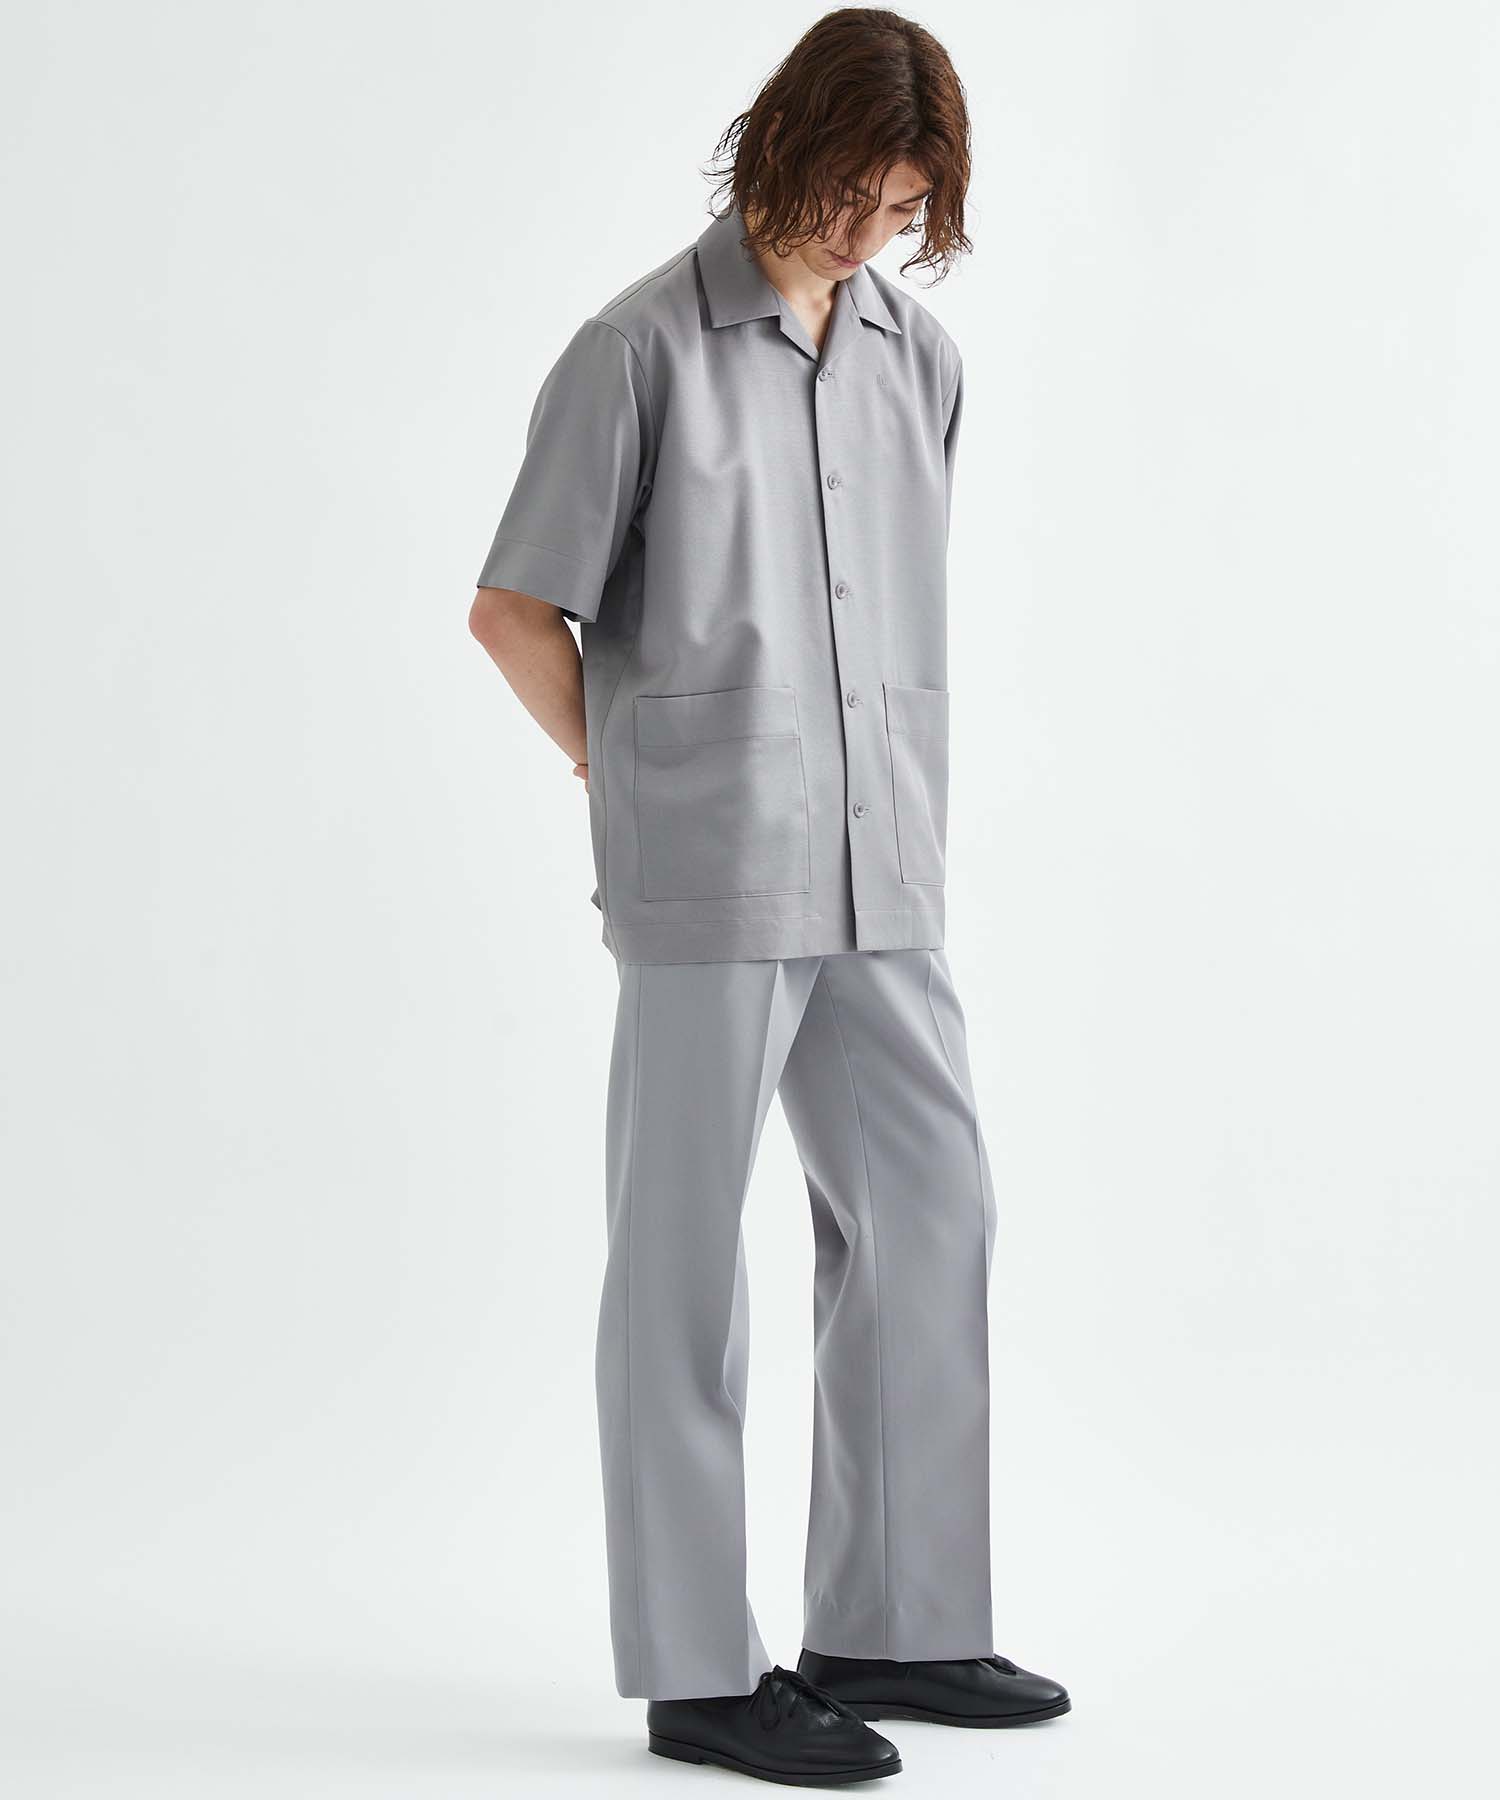 th products QUINN Wide Tailored Pants ワンピなど最旬ア！